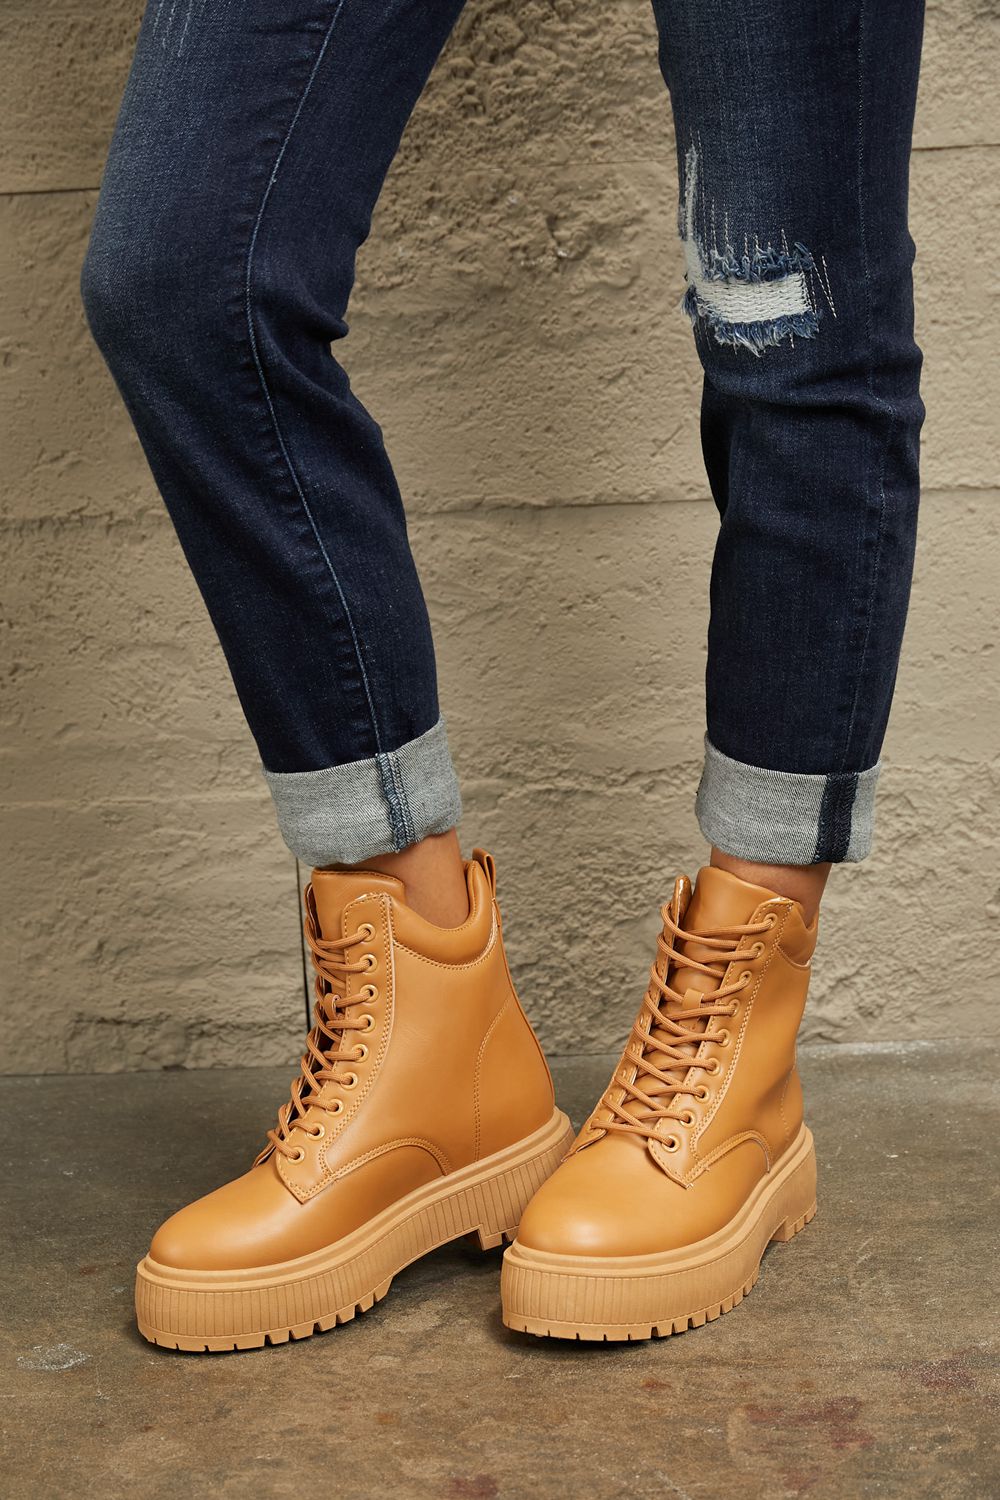 East Lion Corp Platform Combat Boots Print on any thing USA/STOD clothes